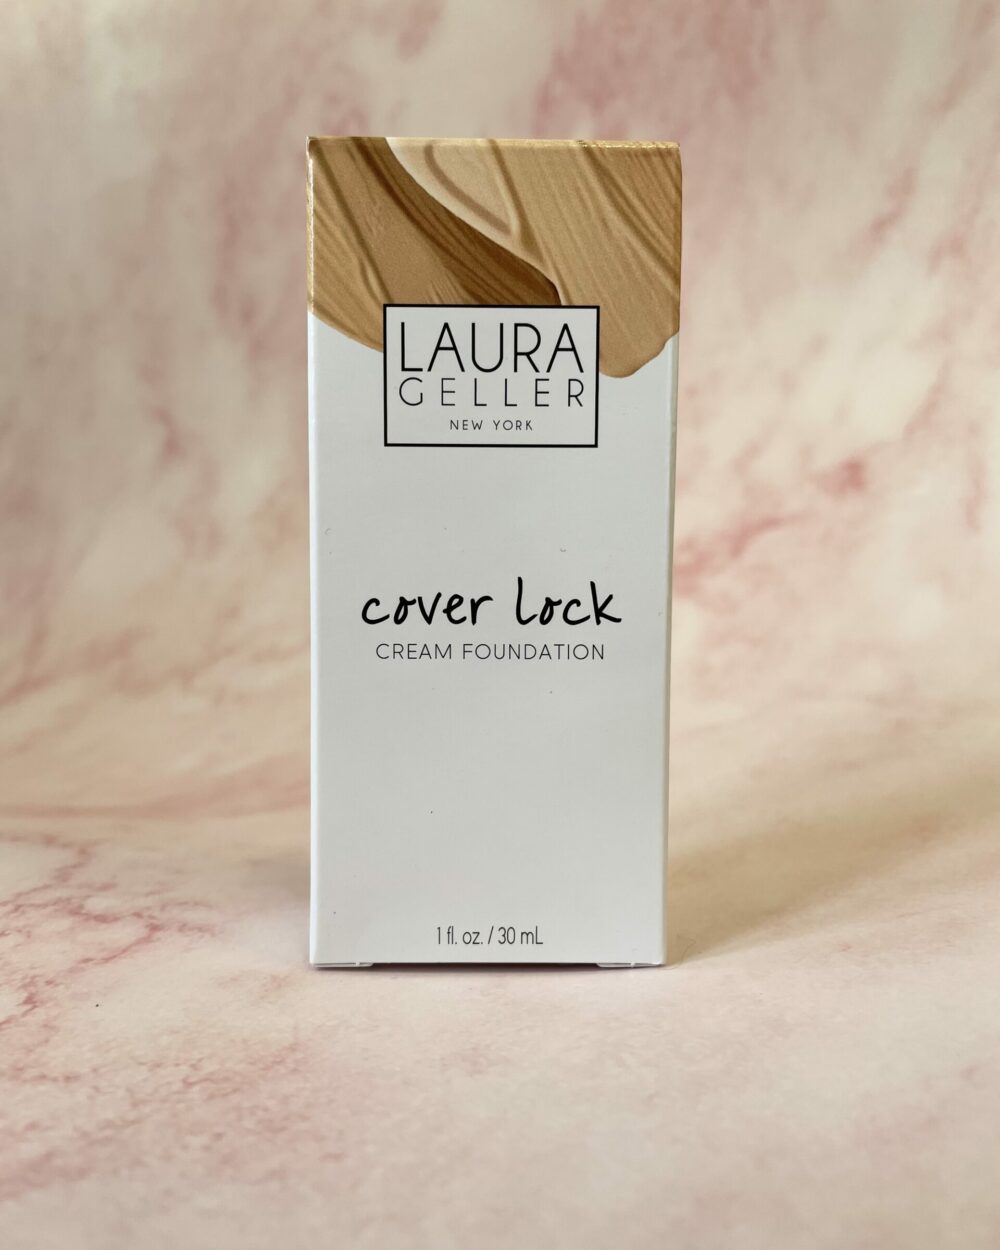 Strawberry Week | Period Self Care Subscription | Laura Geller Cover Lock Cream Foundation 30ml (Various Shades)